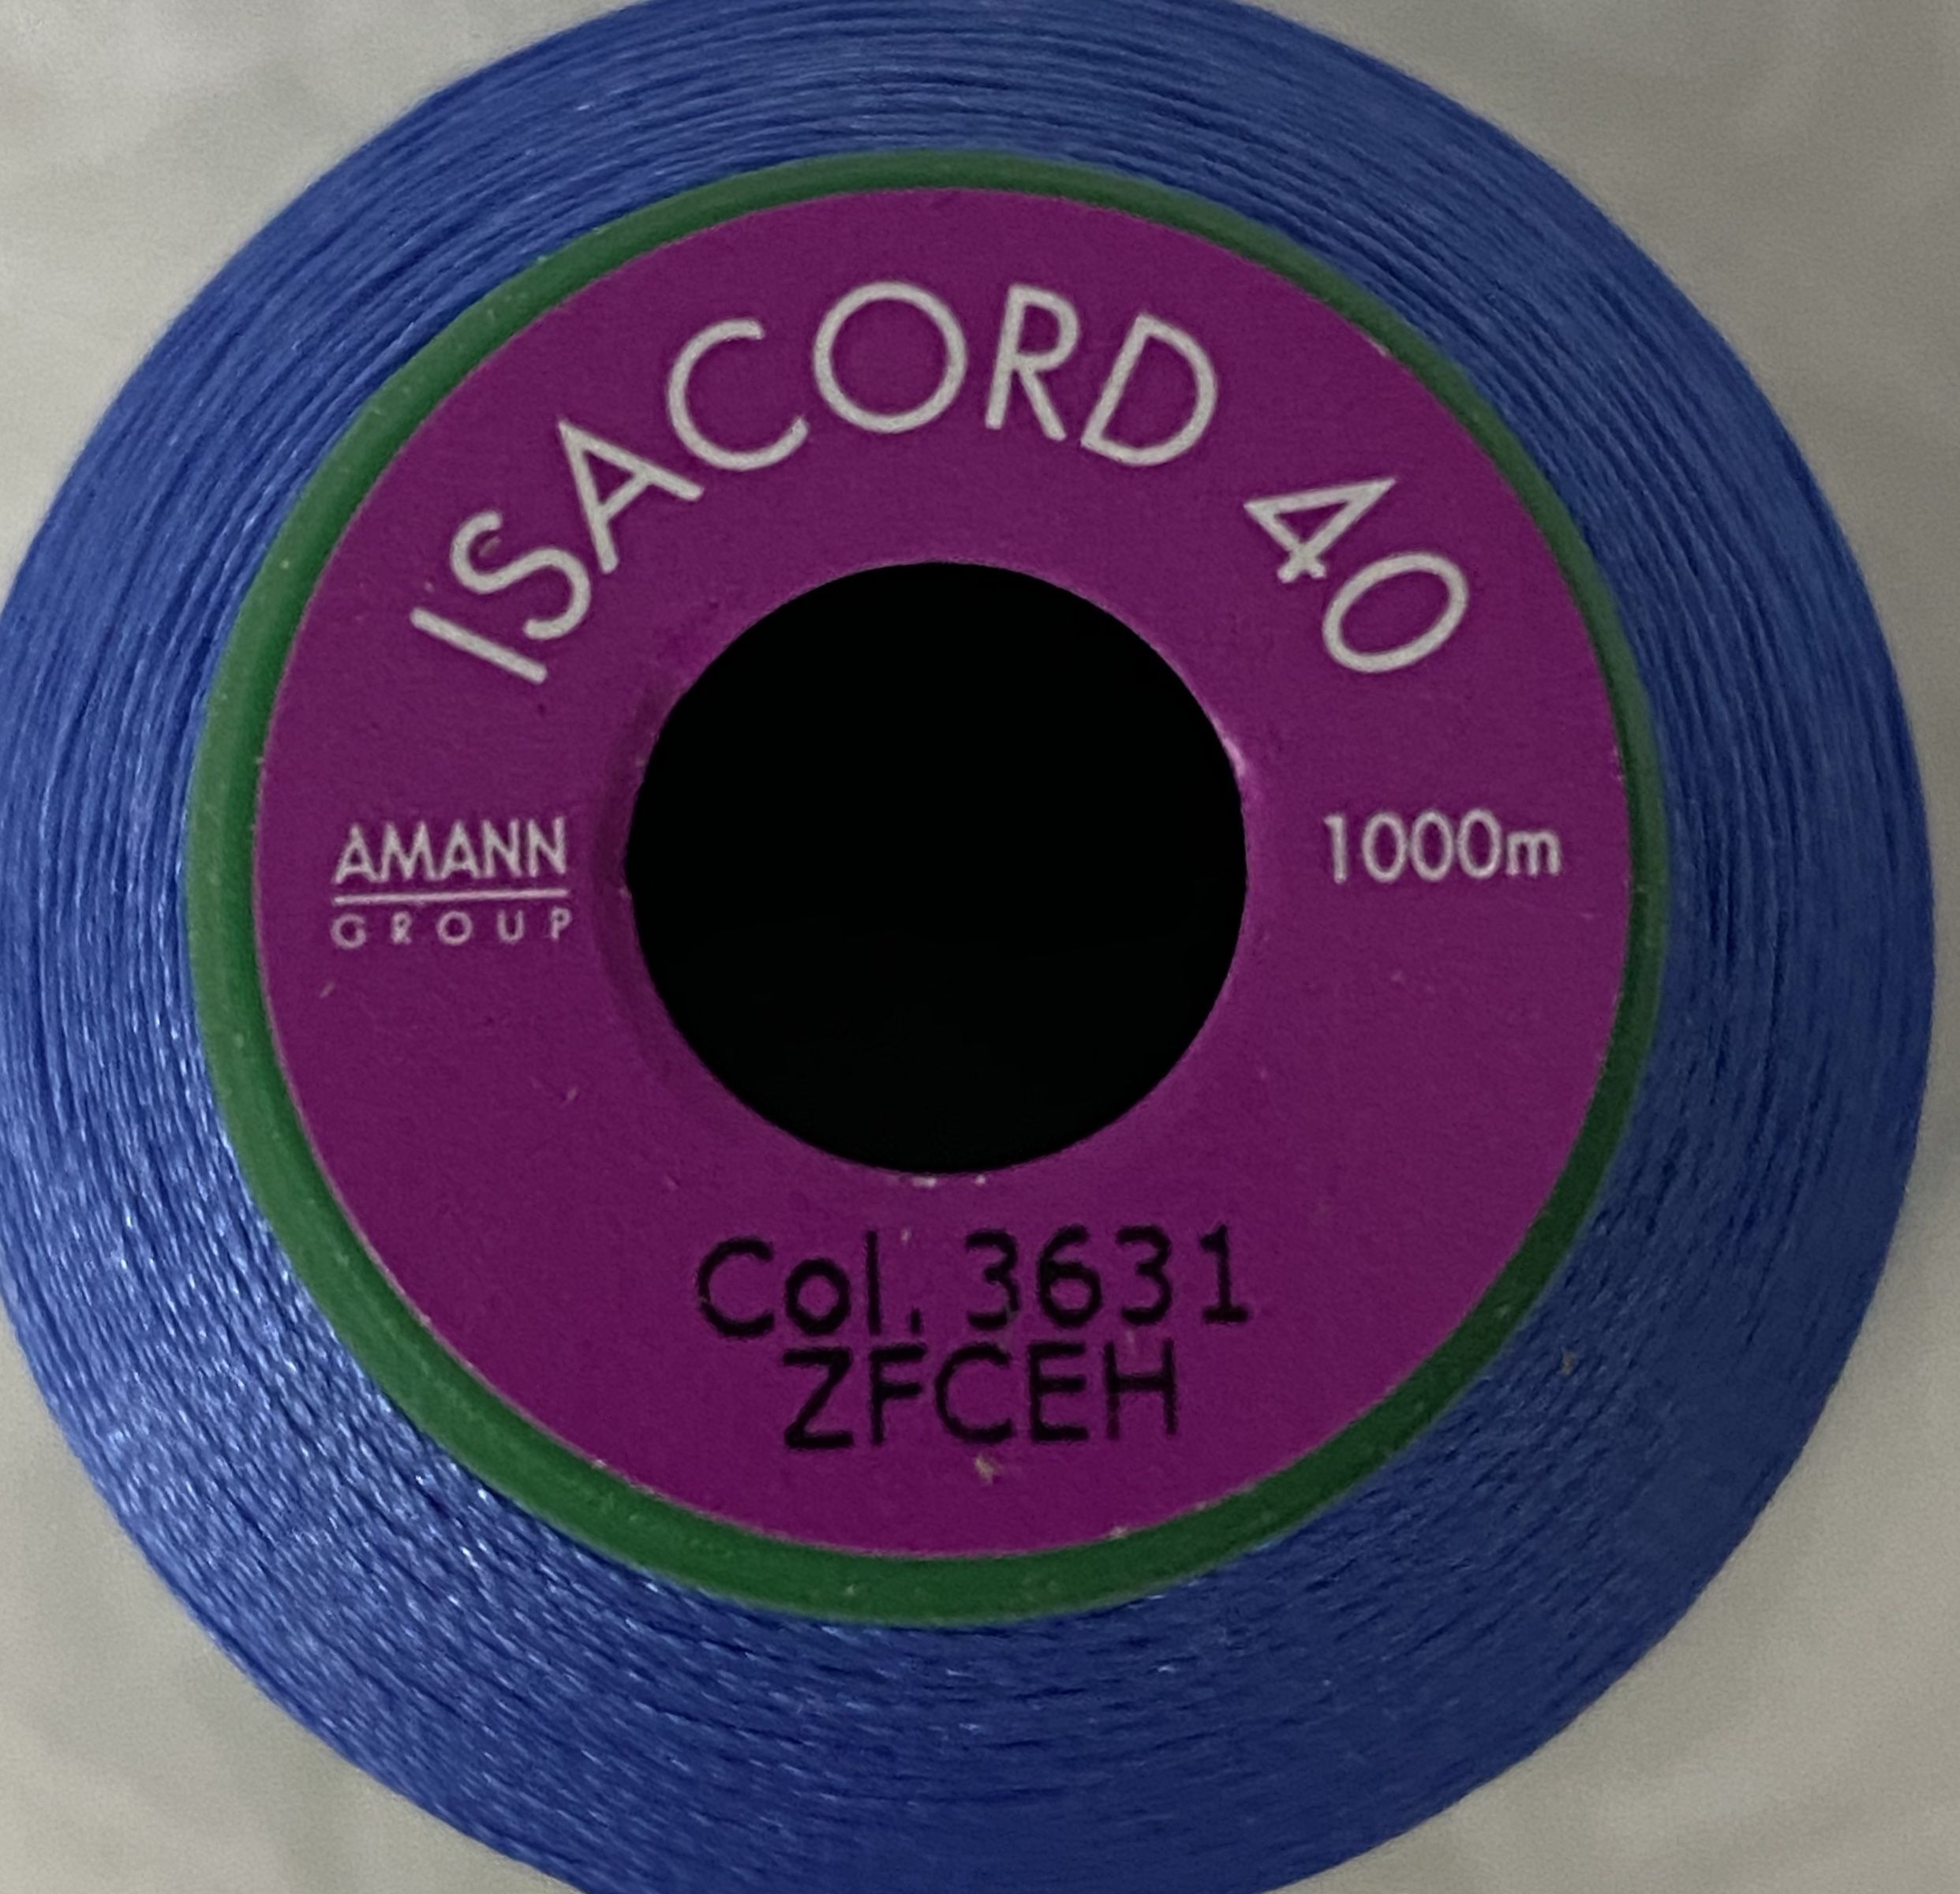 ISACORD 40, Machine Embroidery / Sewing Thread 1000m Colour 3631 TUFTS ...